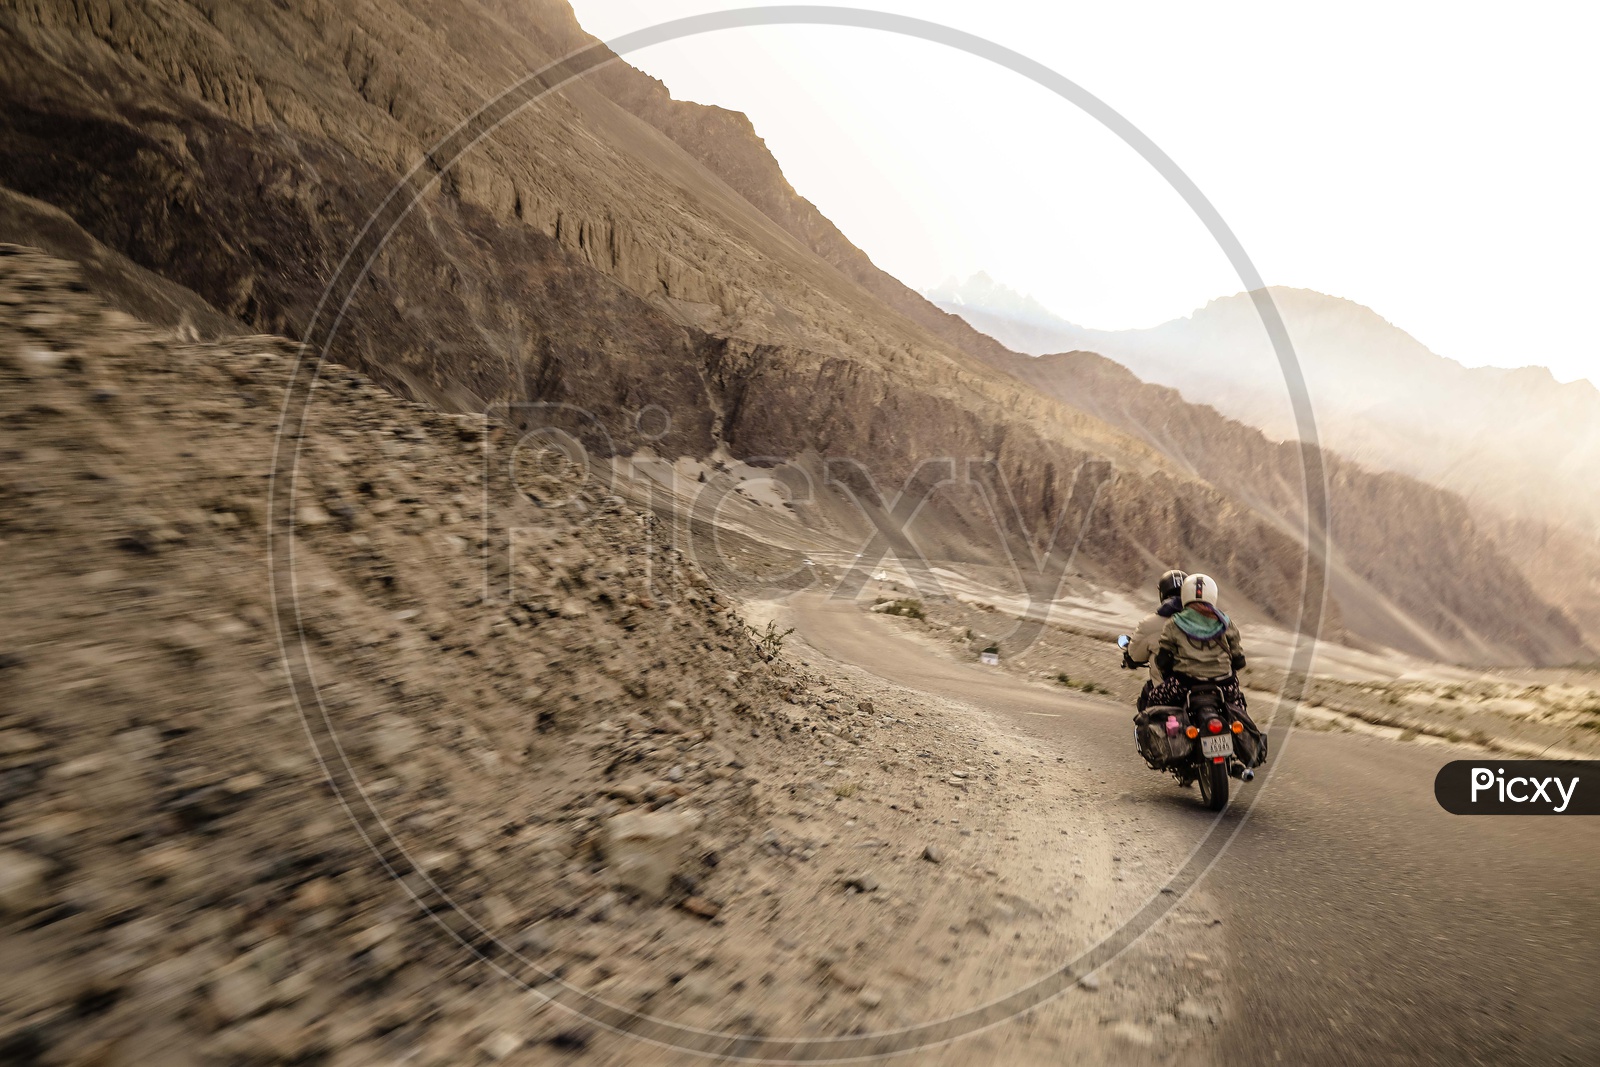 Two travellers riding motorcycle on the dirt road alongside the mountains